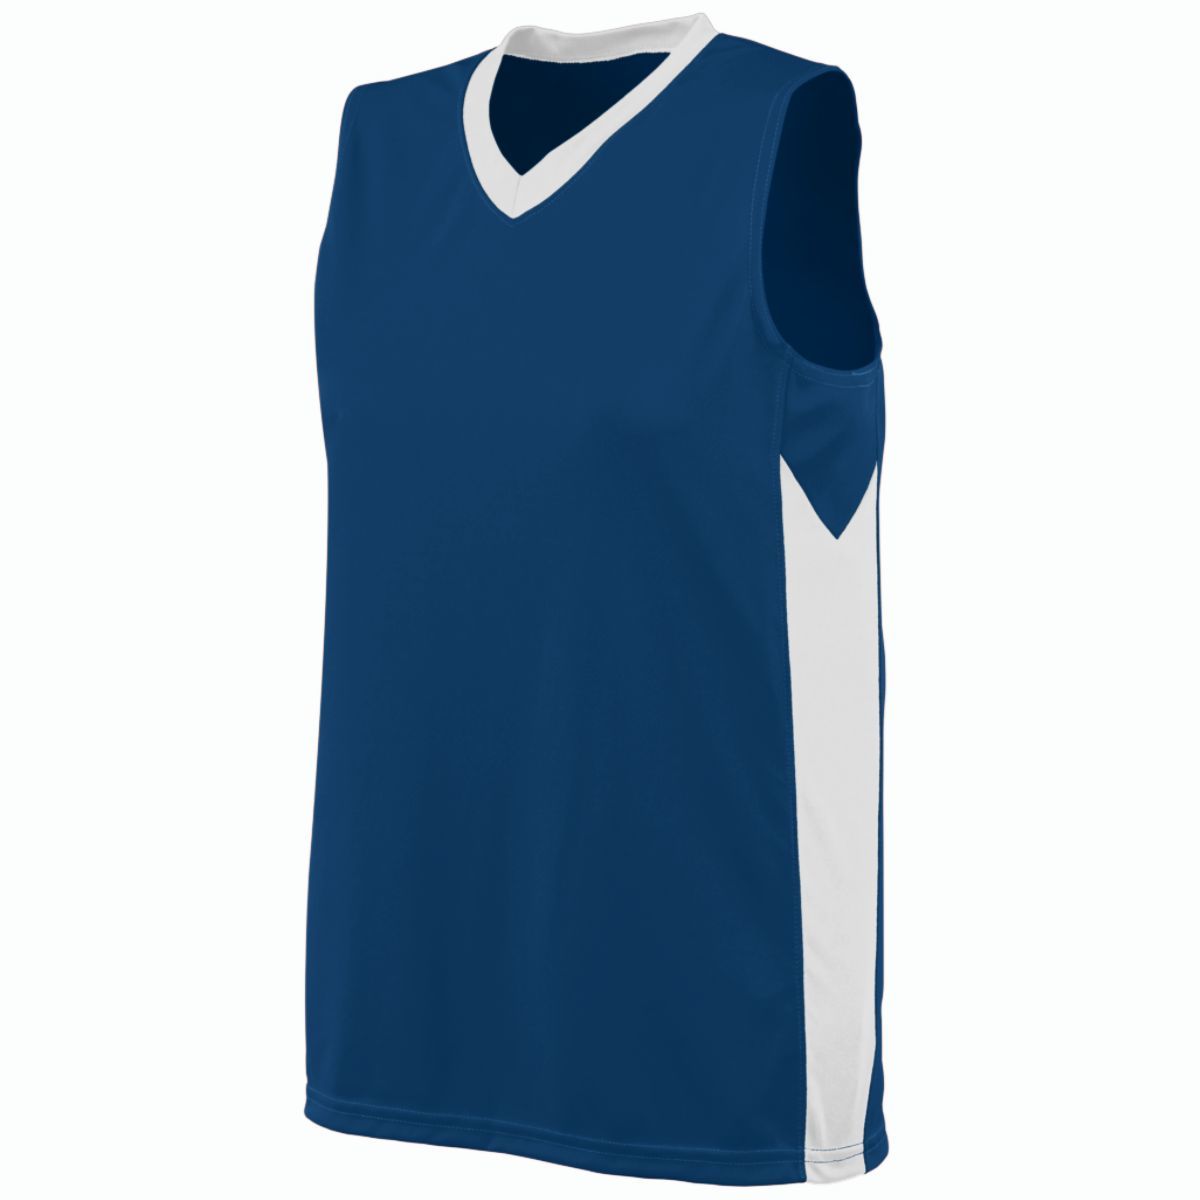 Augusta Sportswear Ladies Block Out Jersey in Navy/White  -Part of the Ladies, Ladies-Jersey, Augusta-Products, Basketball, Shirts, All-Sports, All-Sports-1 product lines at KanaleyCreations.com